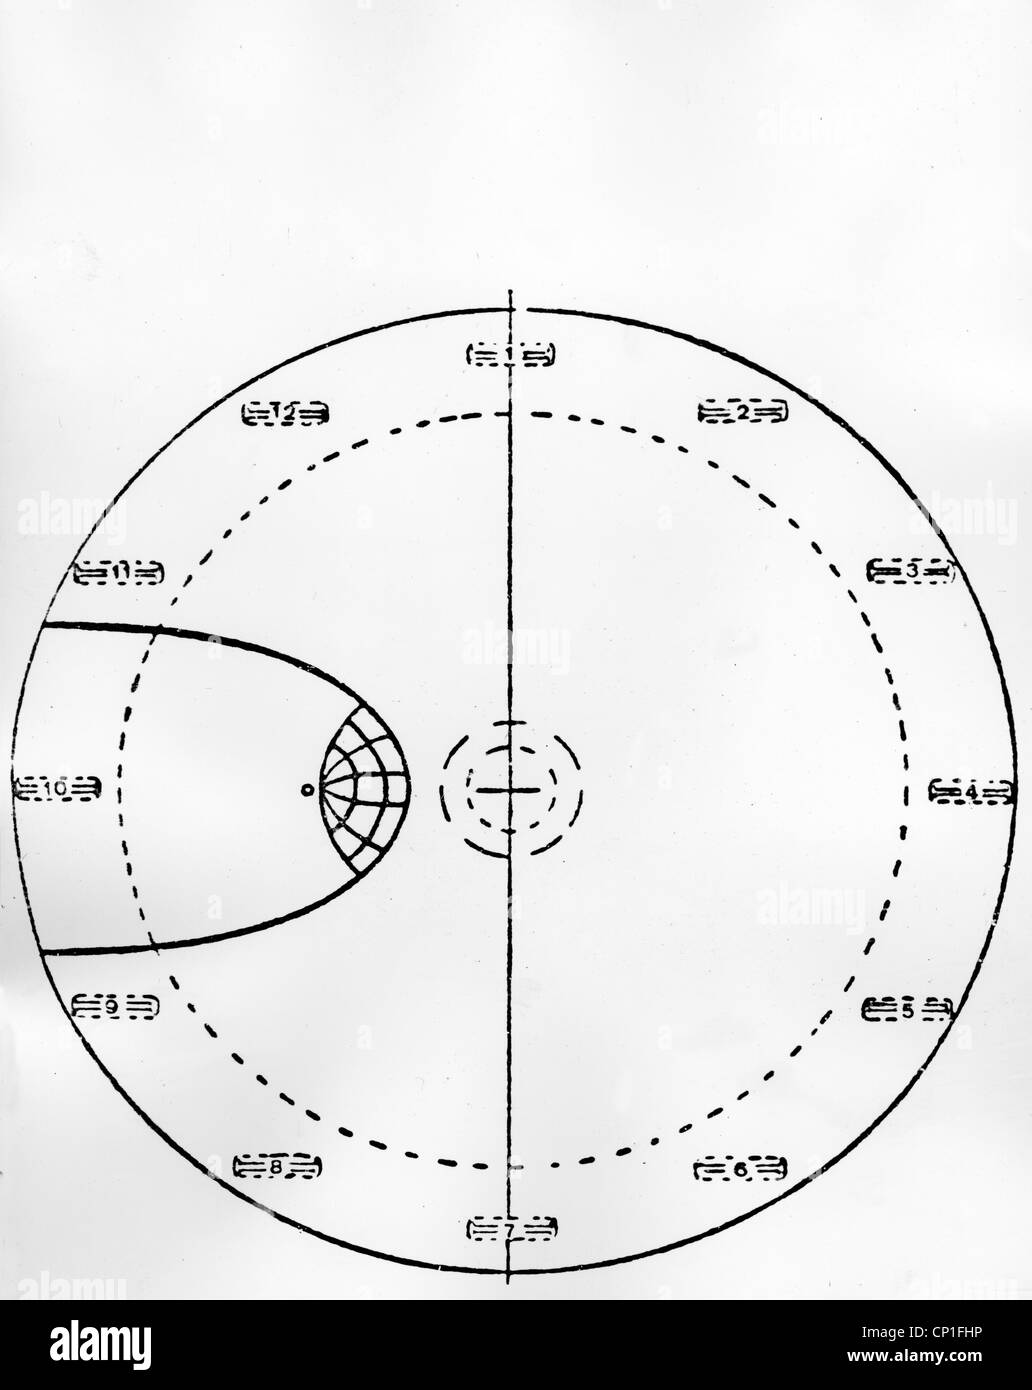 astronautics, UFOs, flying disk, designed by Miethe, top view, drawing, from the book 'Die deutschen Waffen und Geheimwaffen des 2. Weltkrieges und ihre Weiterentwicklung' (The German weapons and secret weapons of World War Two and their further development), by Rudolf Lusar, 2nd edition, J.F. Lehmanns publishing, Munich, Germany, 1958, Additional-Rights-Clearences-Not Available Stock Photo